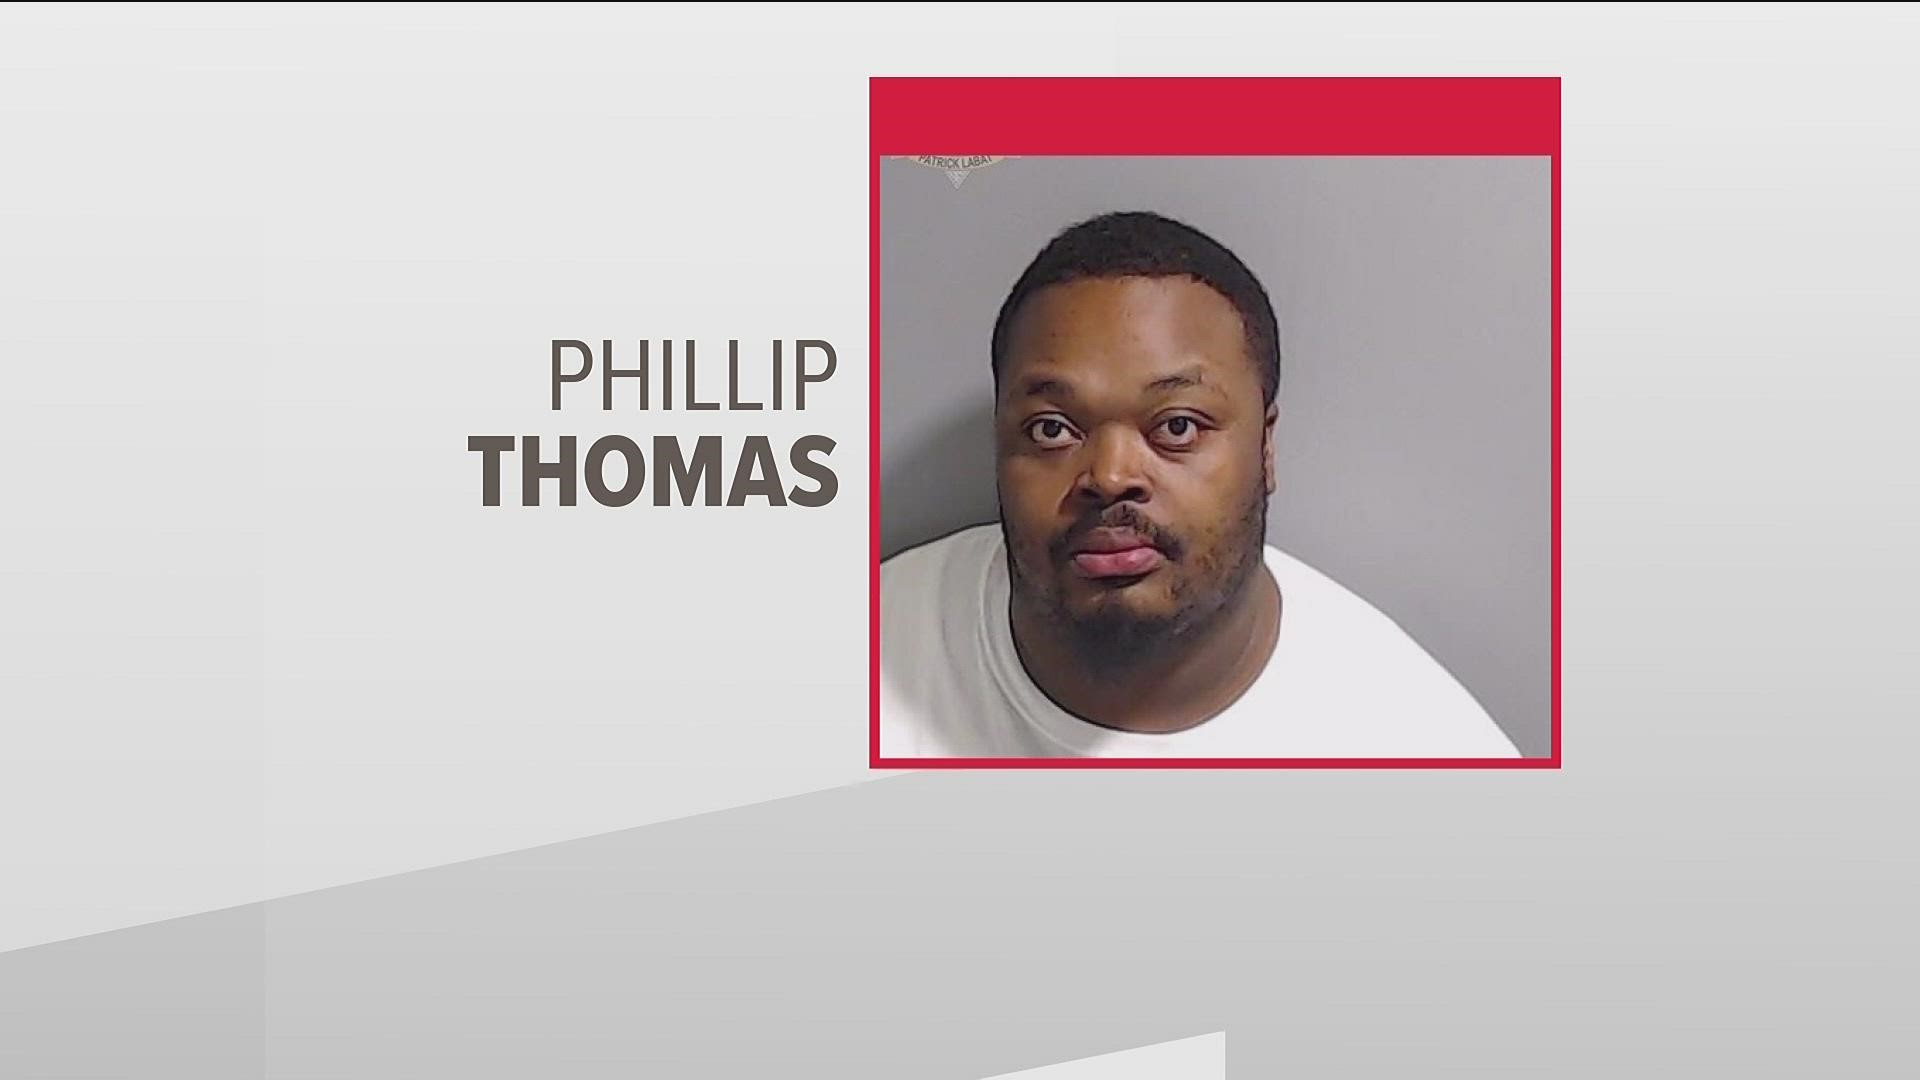 Phillip M. Thomas was charged Thursday in a shooting death of a man on Moreland Avenue.